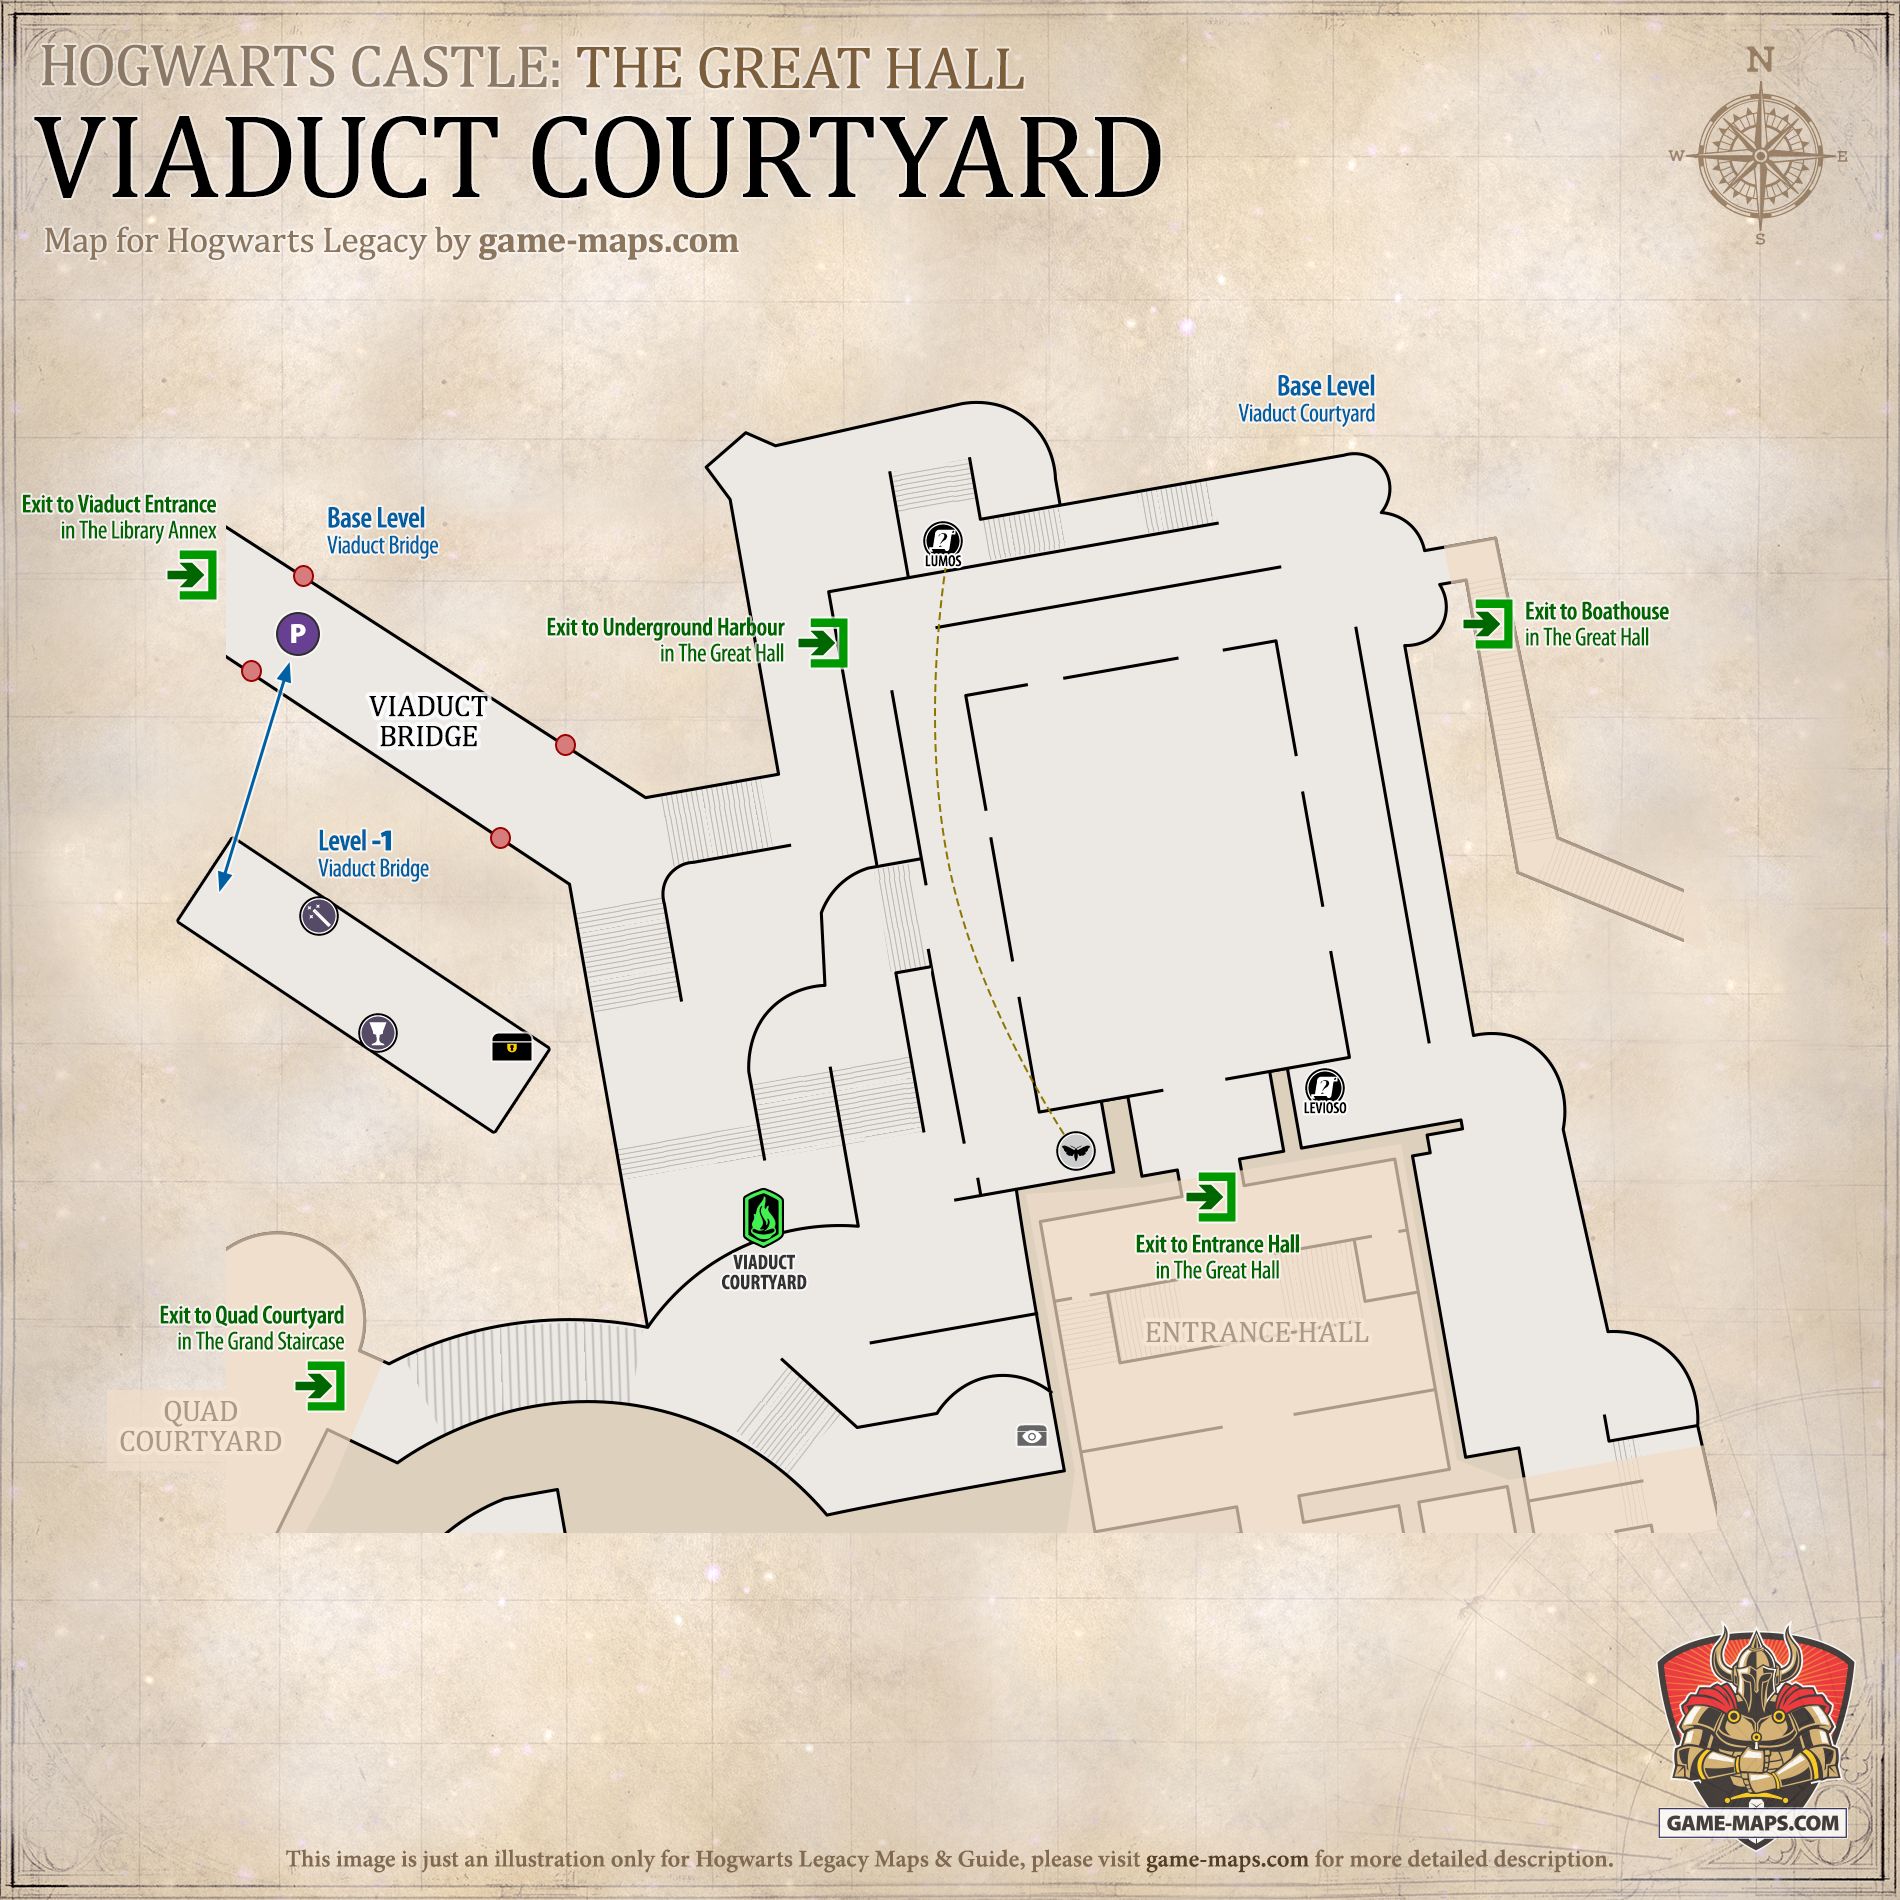 Viaduct Courtyard Map for Hogwarts Legacy